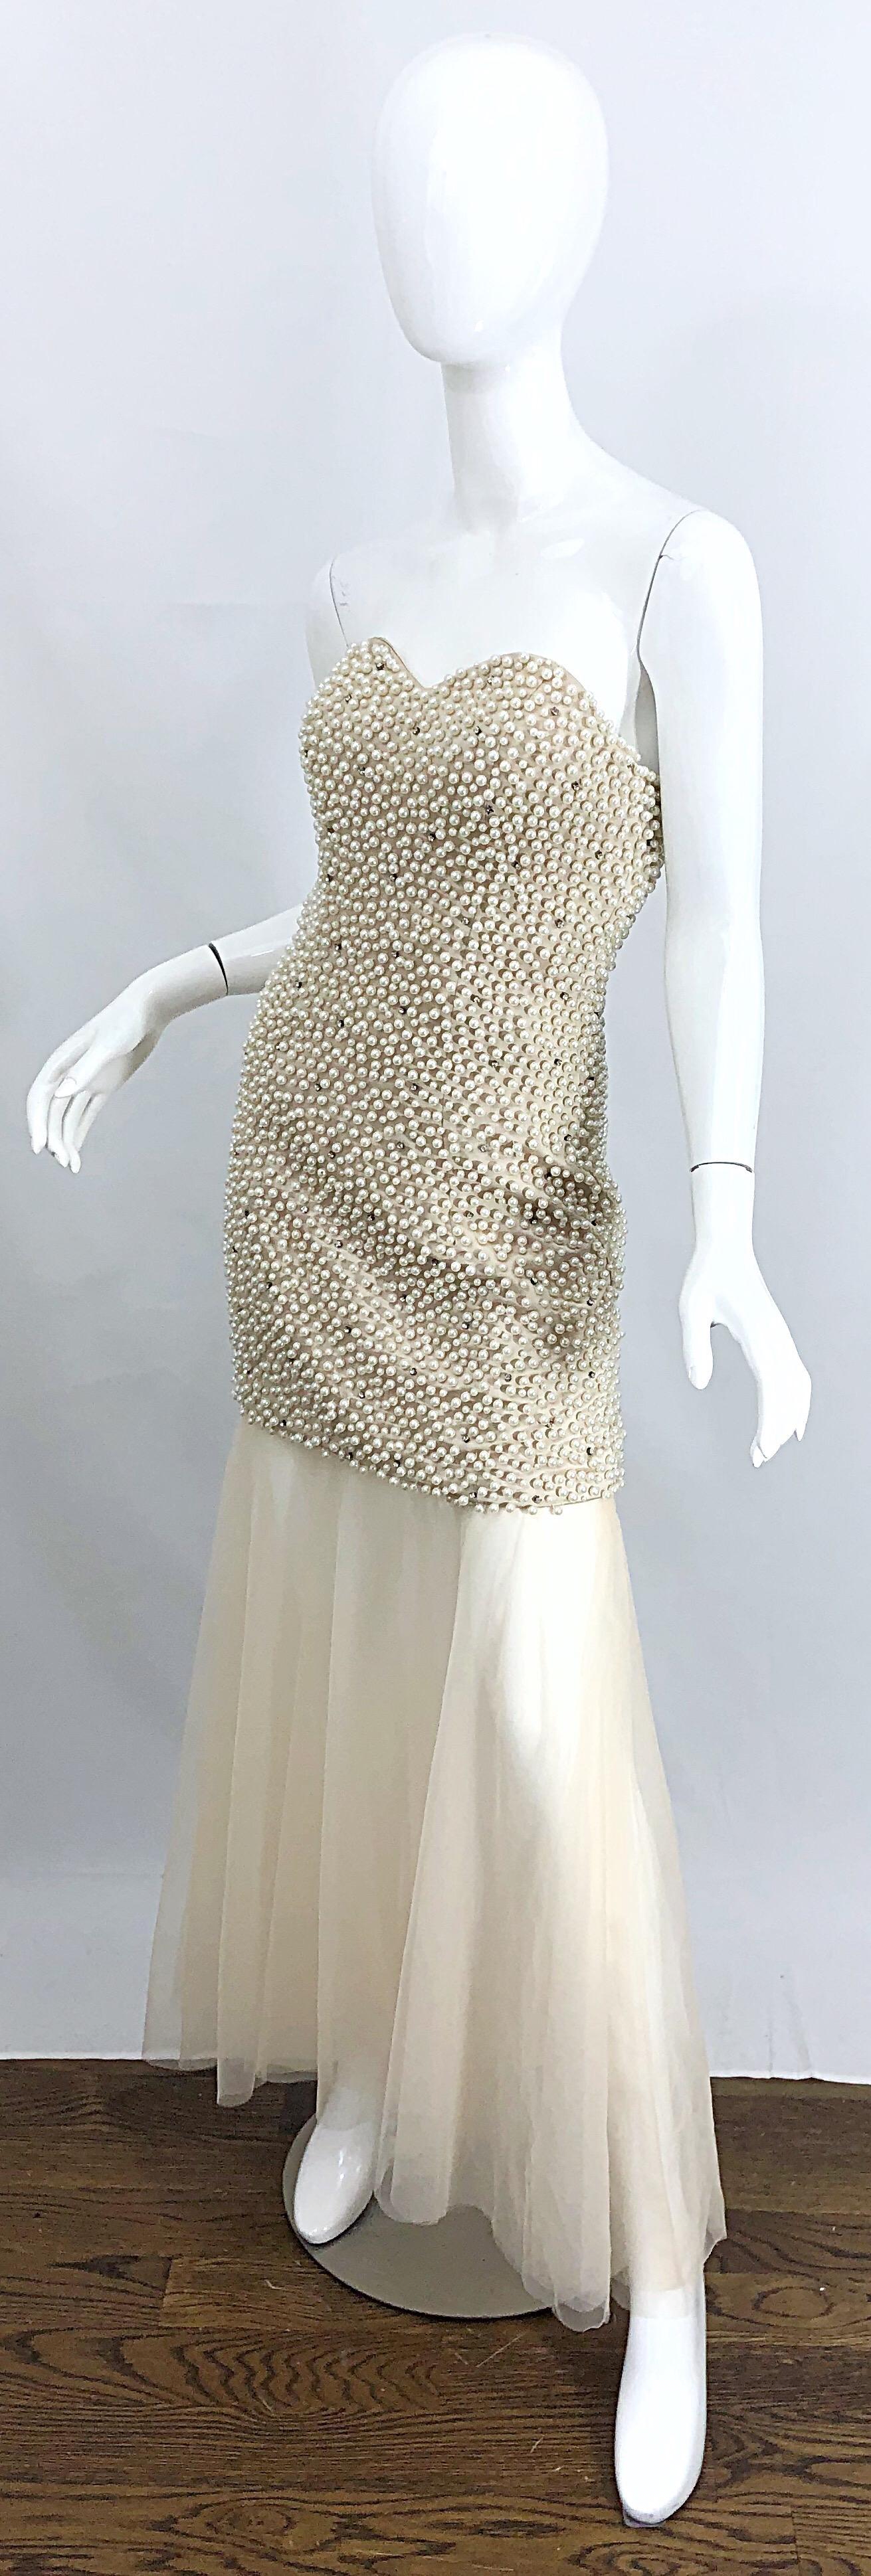 Women's Phenomenal 1980s Couture Pearl + Rhinestone Encrusted Strapless Beige 80s Gown